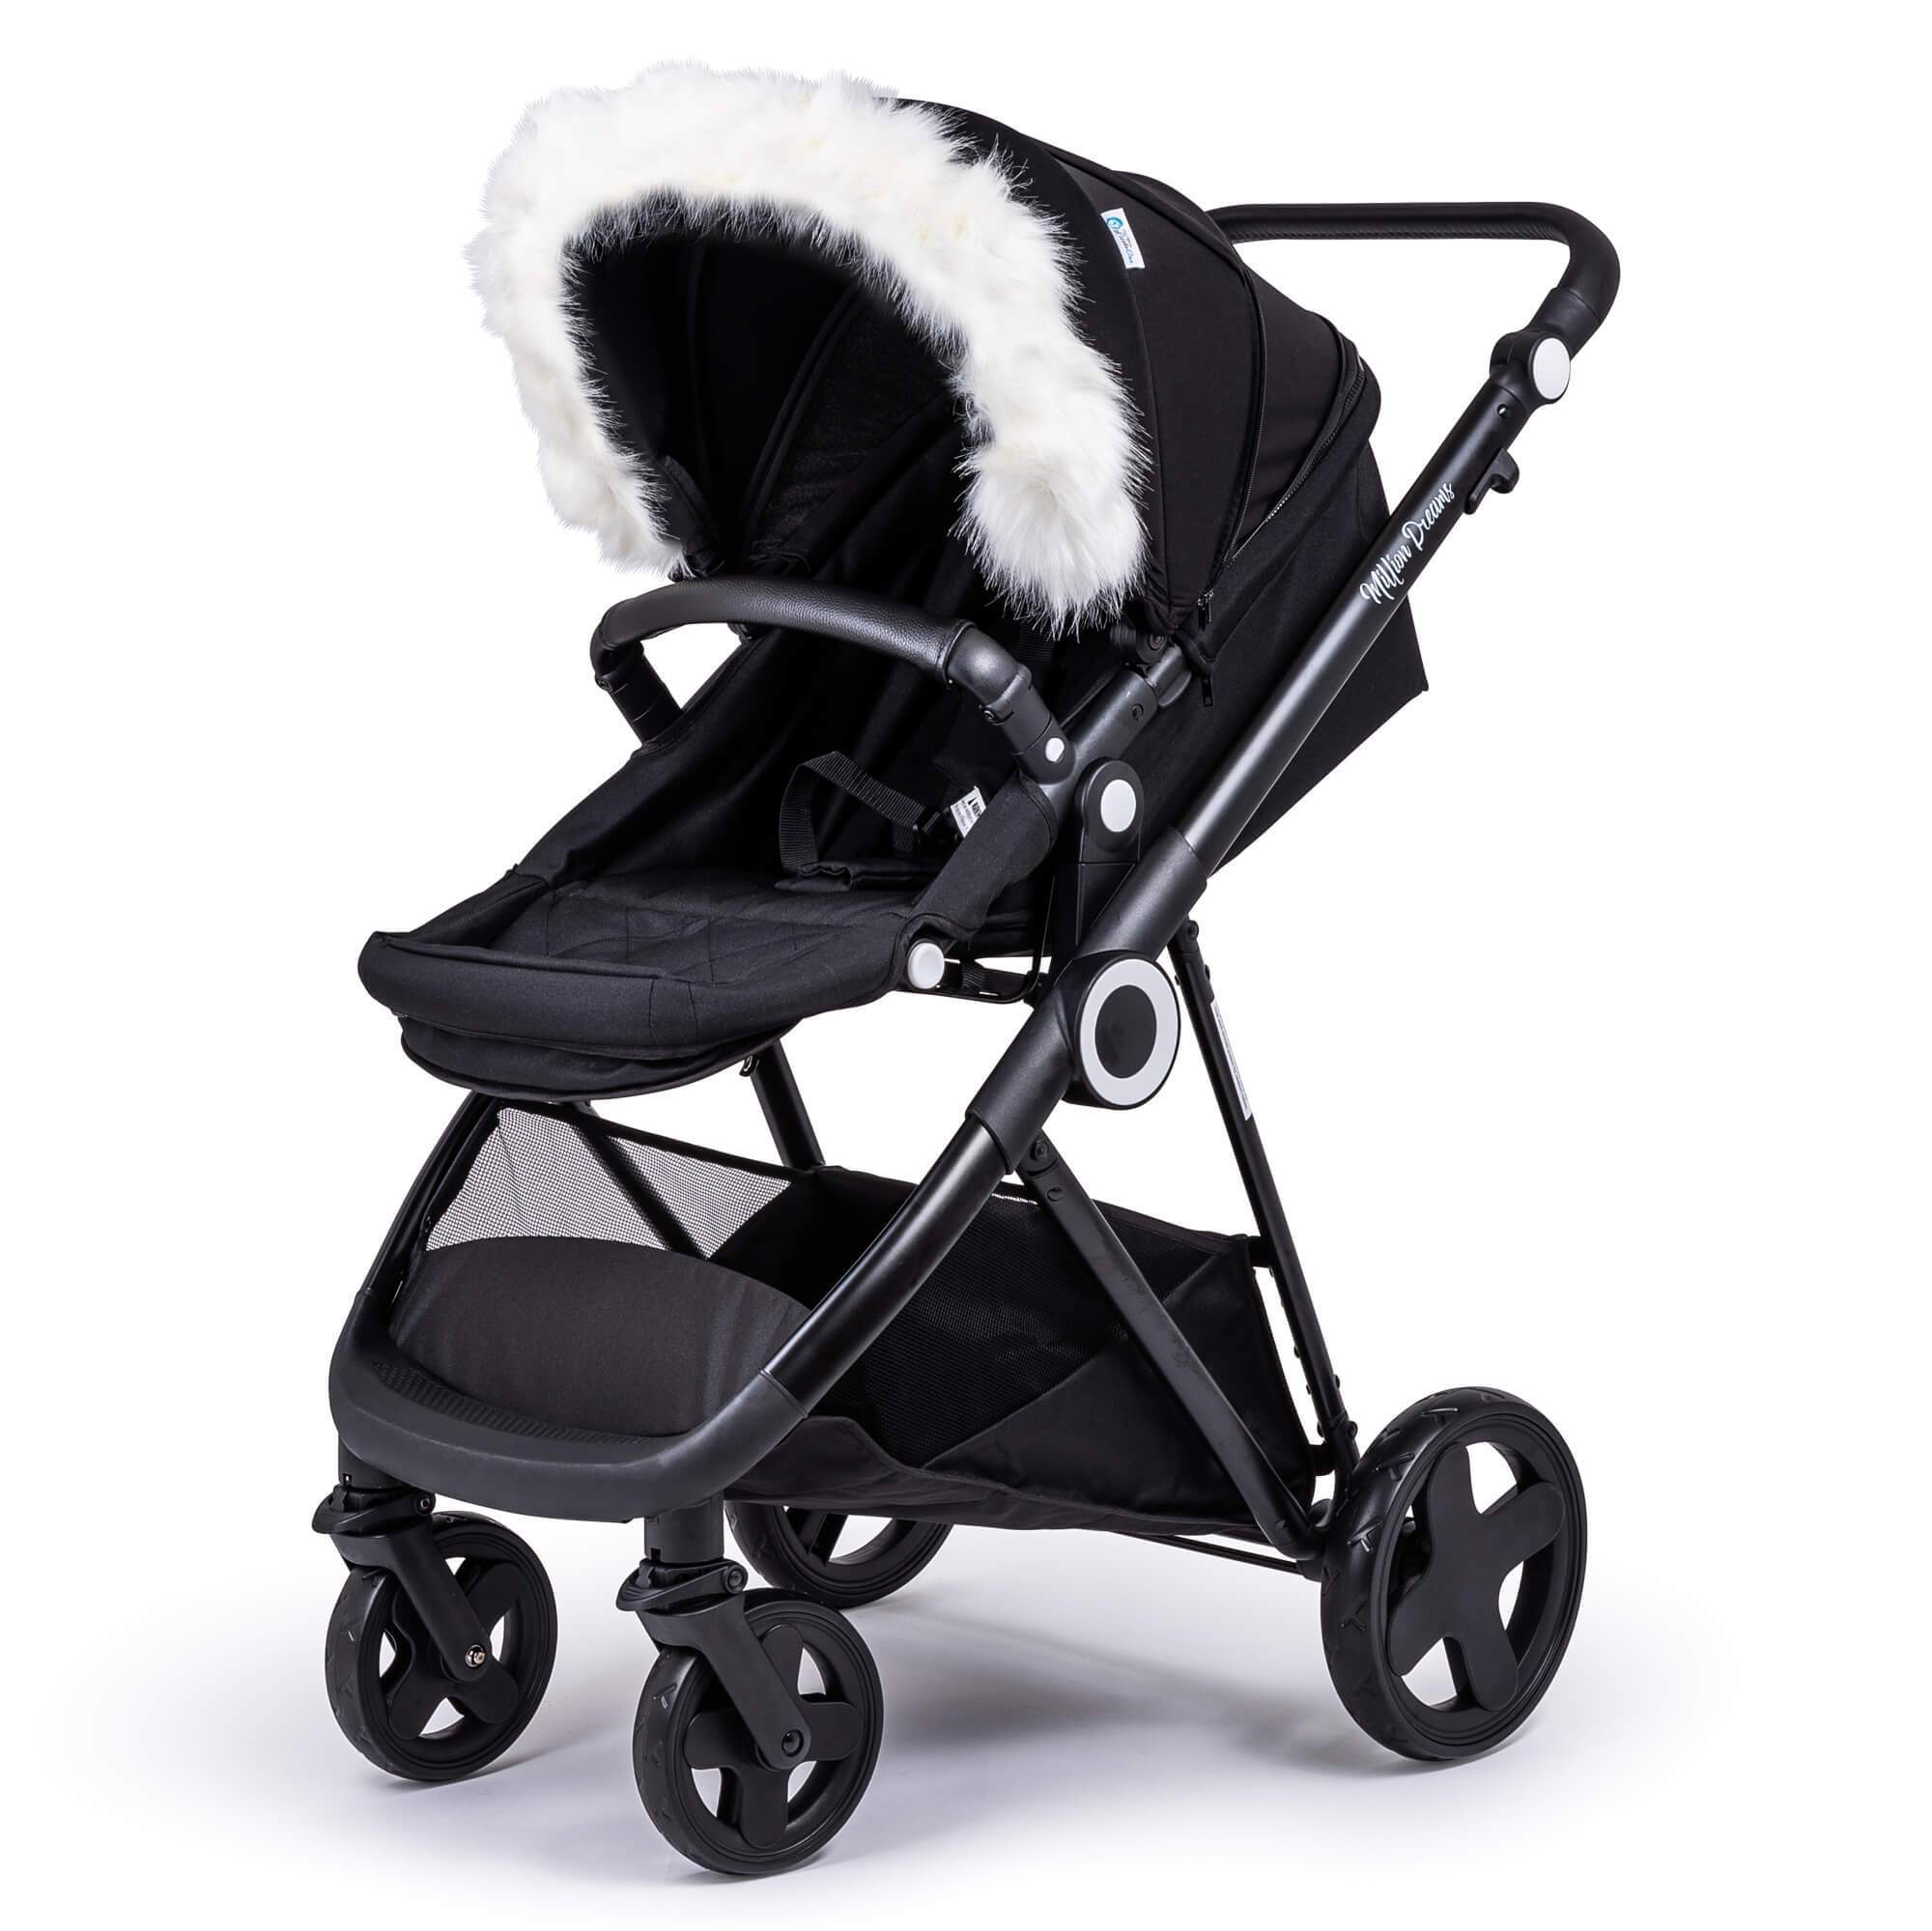 Pram Fur Hood Trim Attachment For Pushchair Compatible with Tutti Bambini - White / Fits All Models | For Your Little One